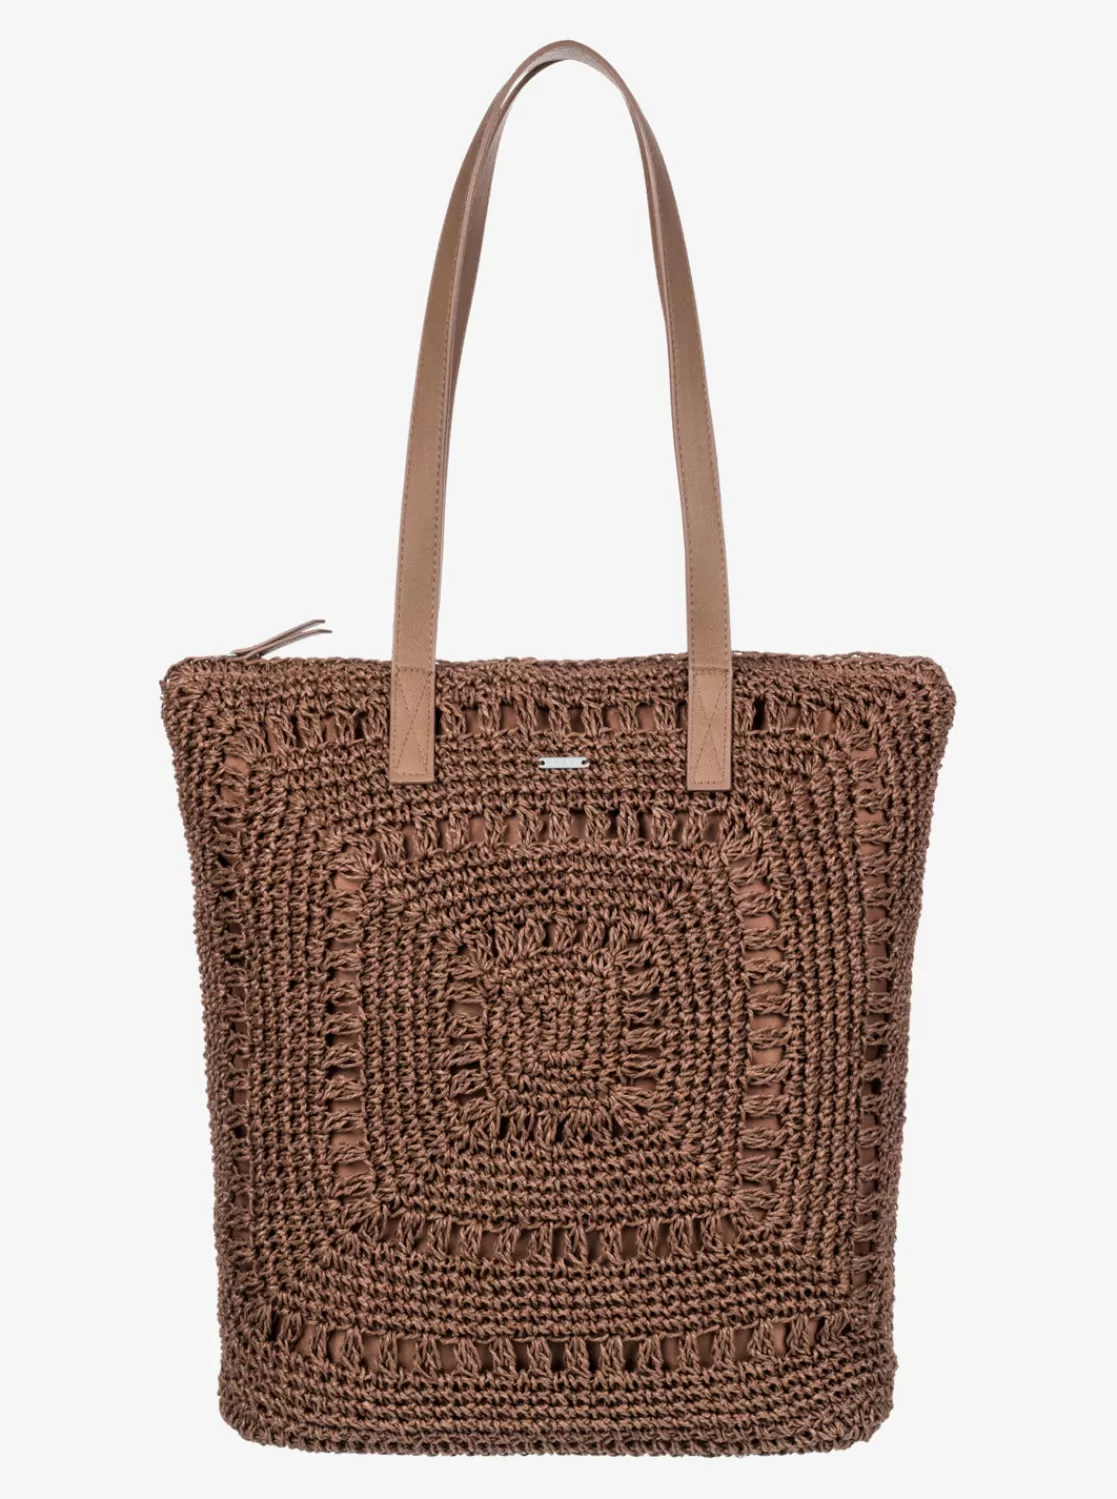 Coco Cool Tote Bag-ROXY Best Sale